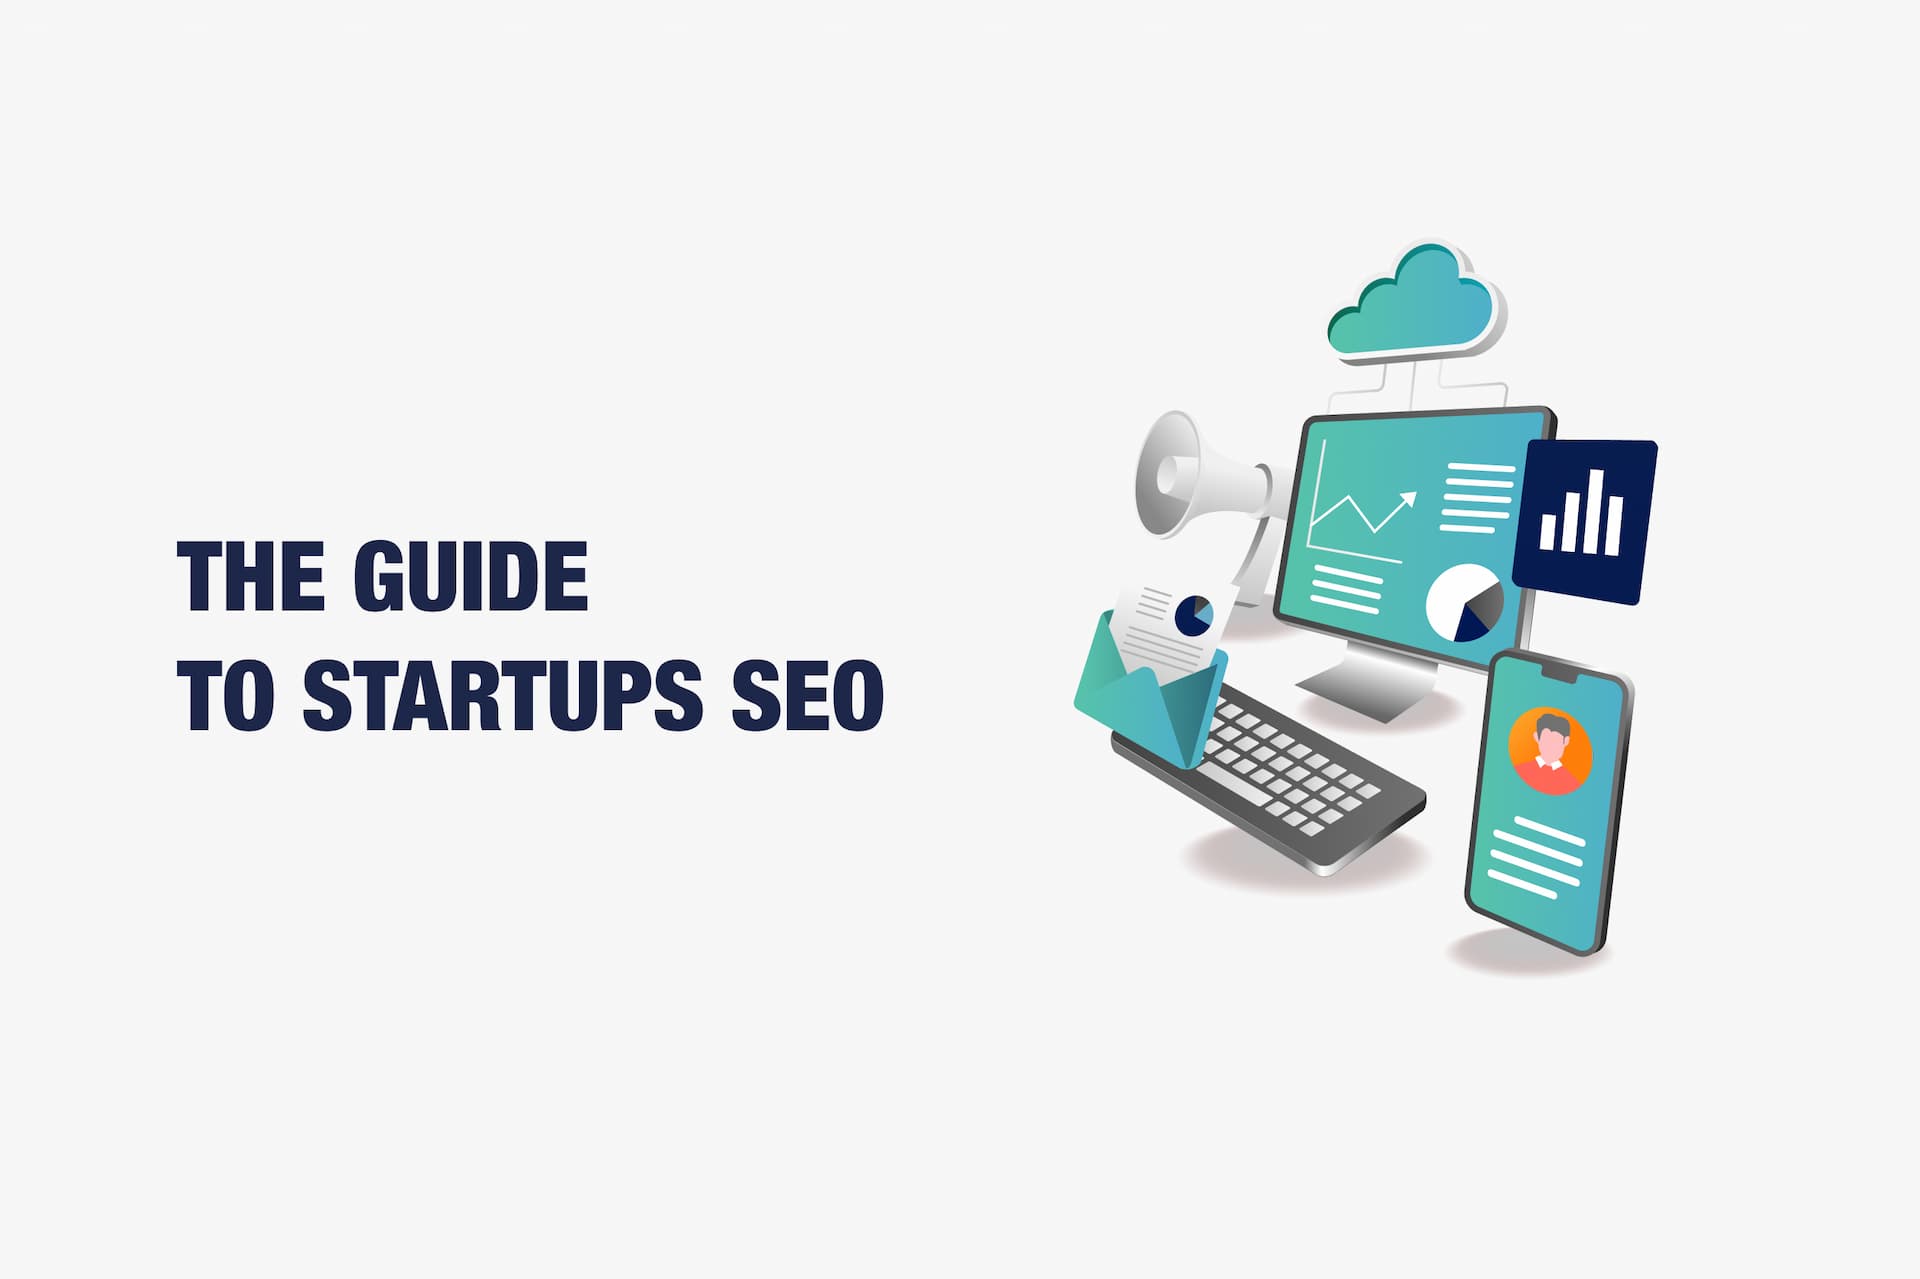 The Guide to Startups SEO